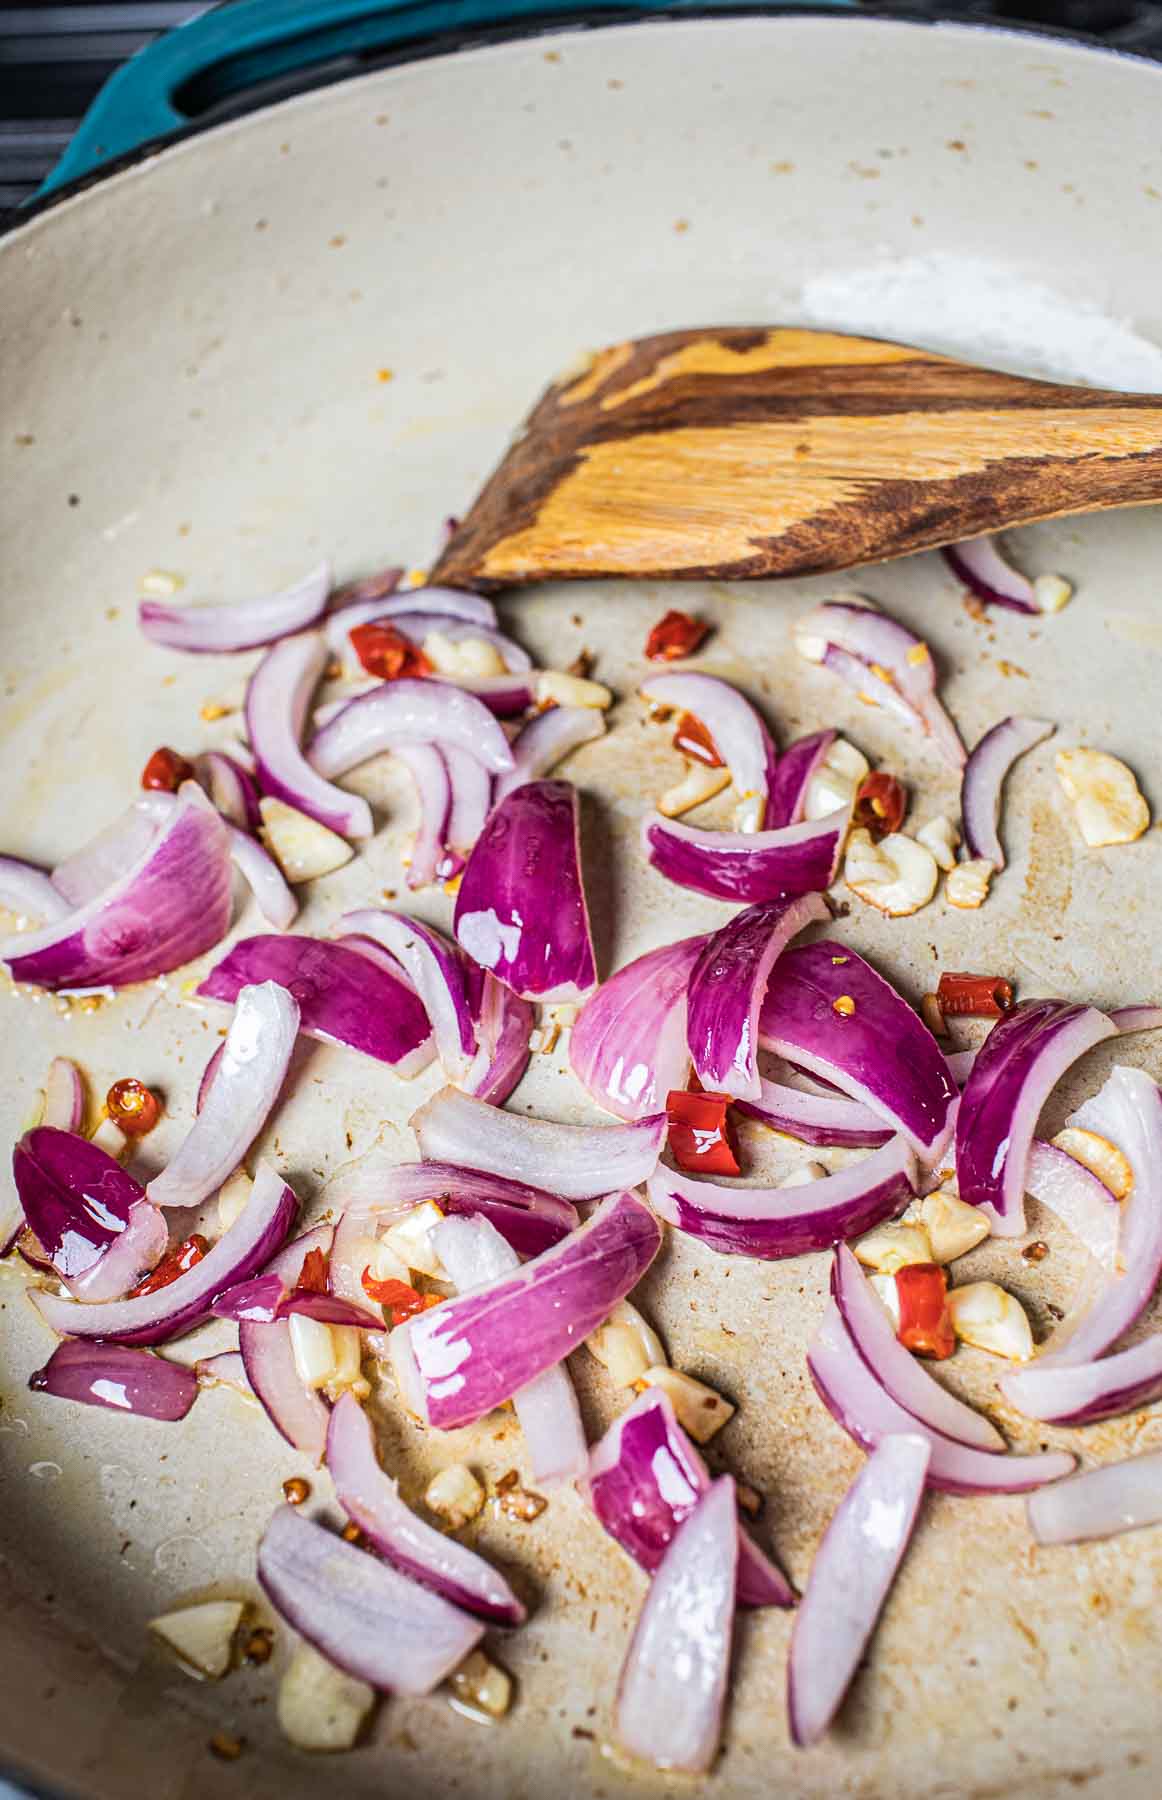 purple onion, garlic and chilis in a stir frying pan